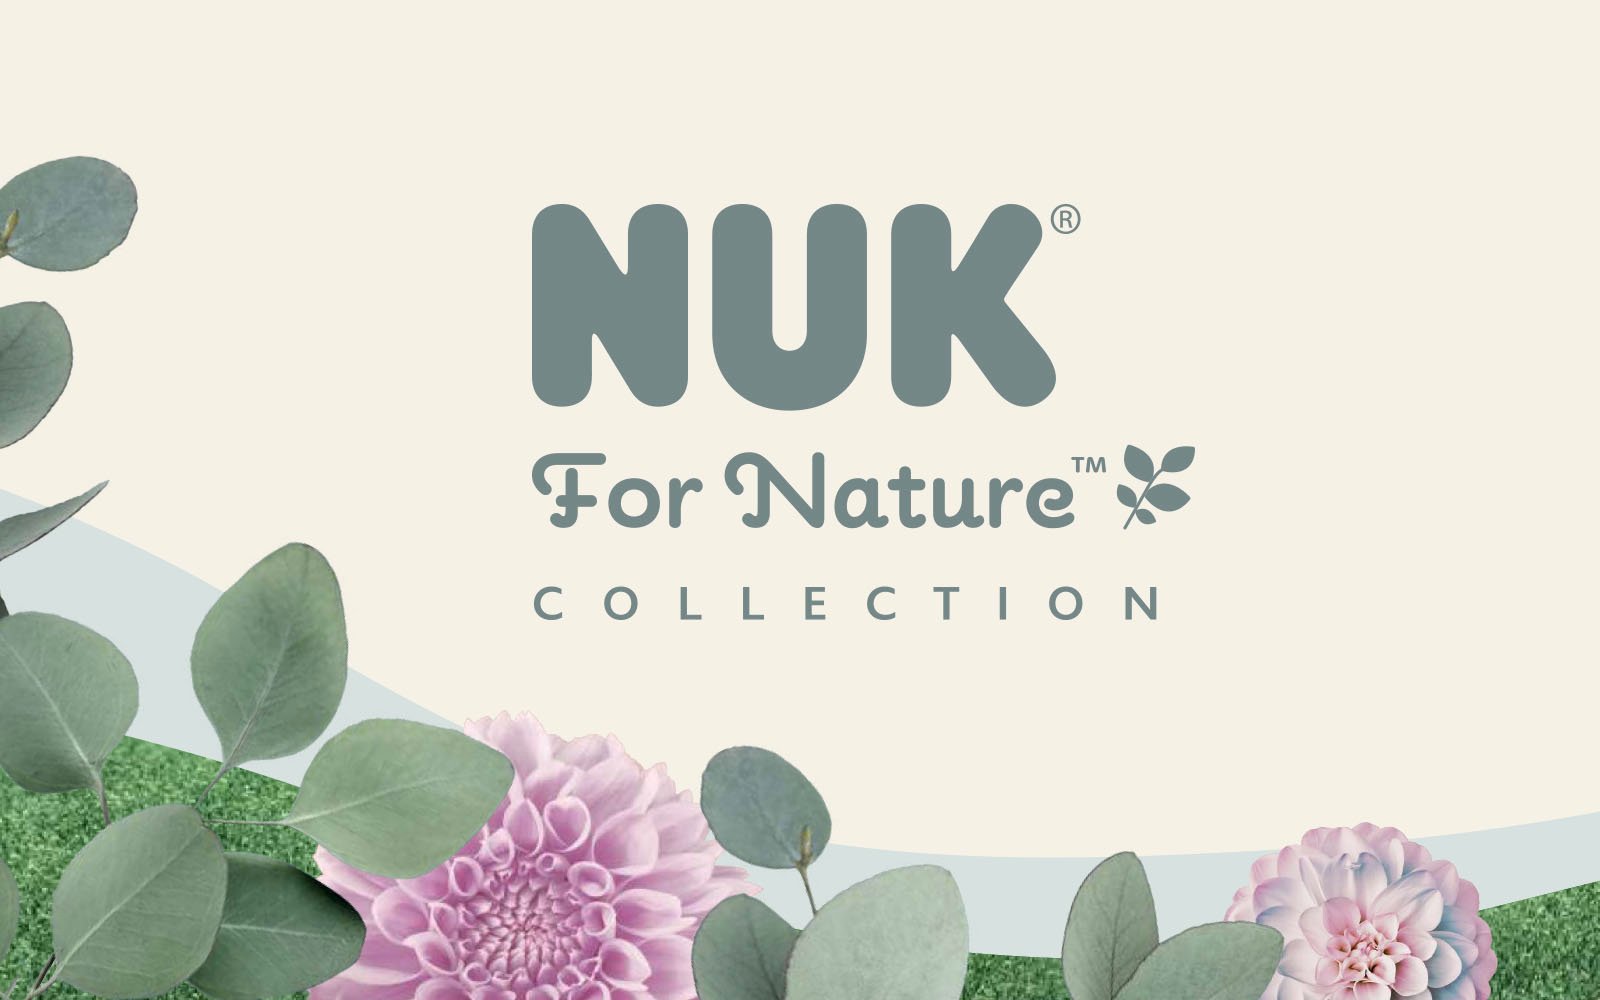 NUK for Nature collection with plants and flowers